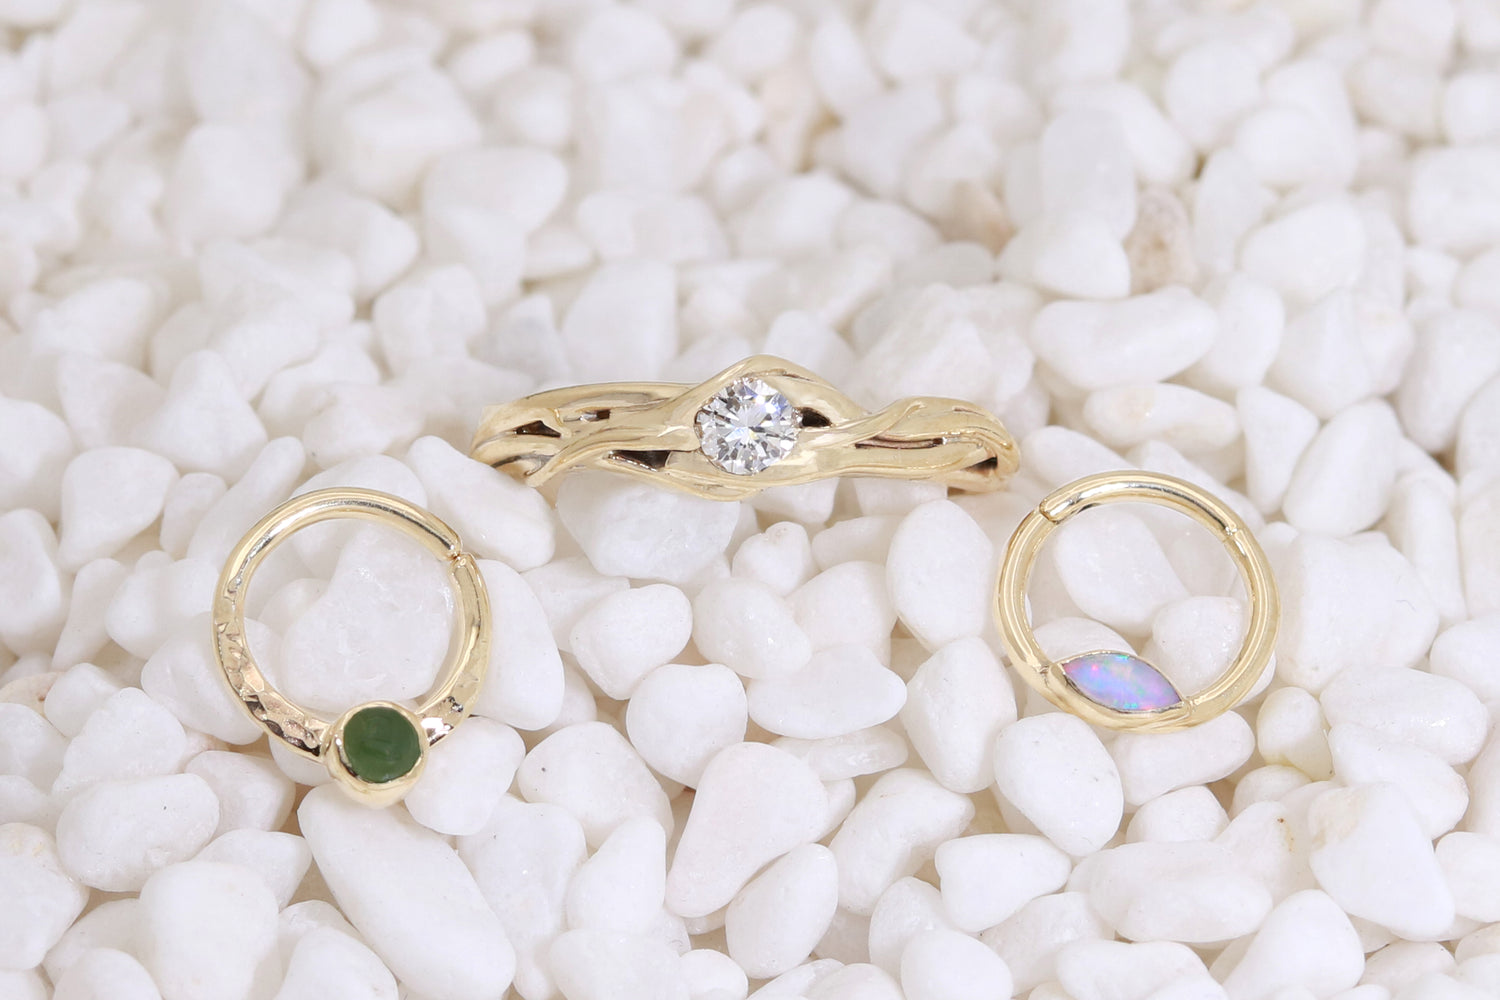 Three pieces sit on white pebbles. A jade and 14k yellow gold septum hoop, a 14k yellow gold and opal septum hoop and a 14k yellow gold and solitaire diamond one of a kind engagement ring featuring vines hugging a diamond.